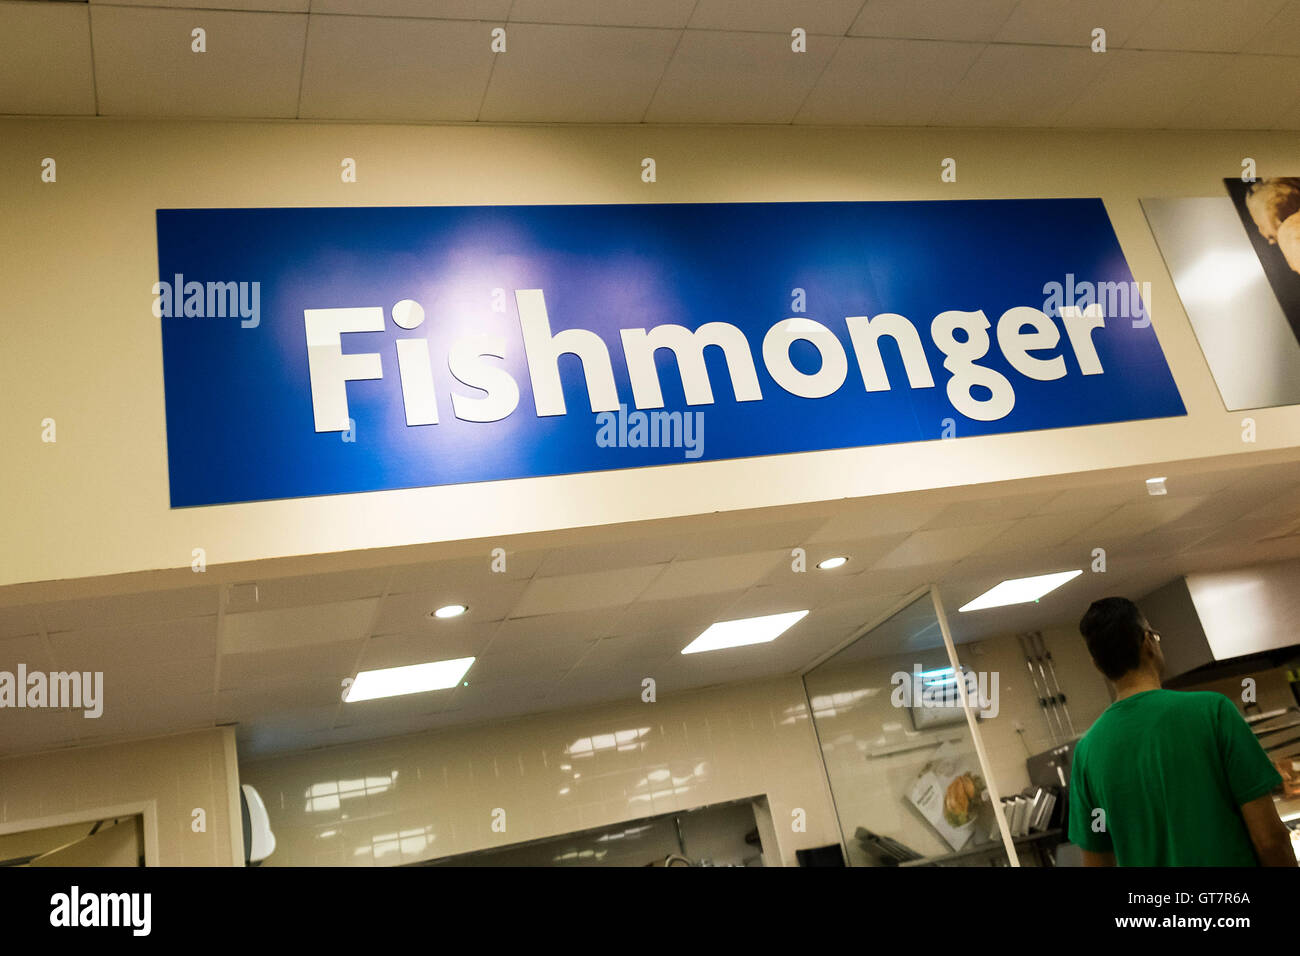 The Fishmongers in a Morrisons supermarket. Stock Photo